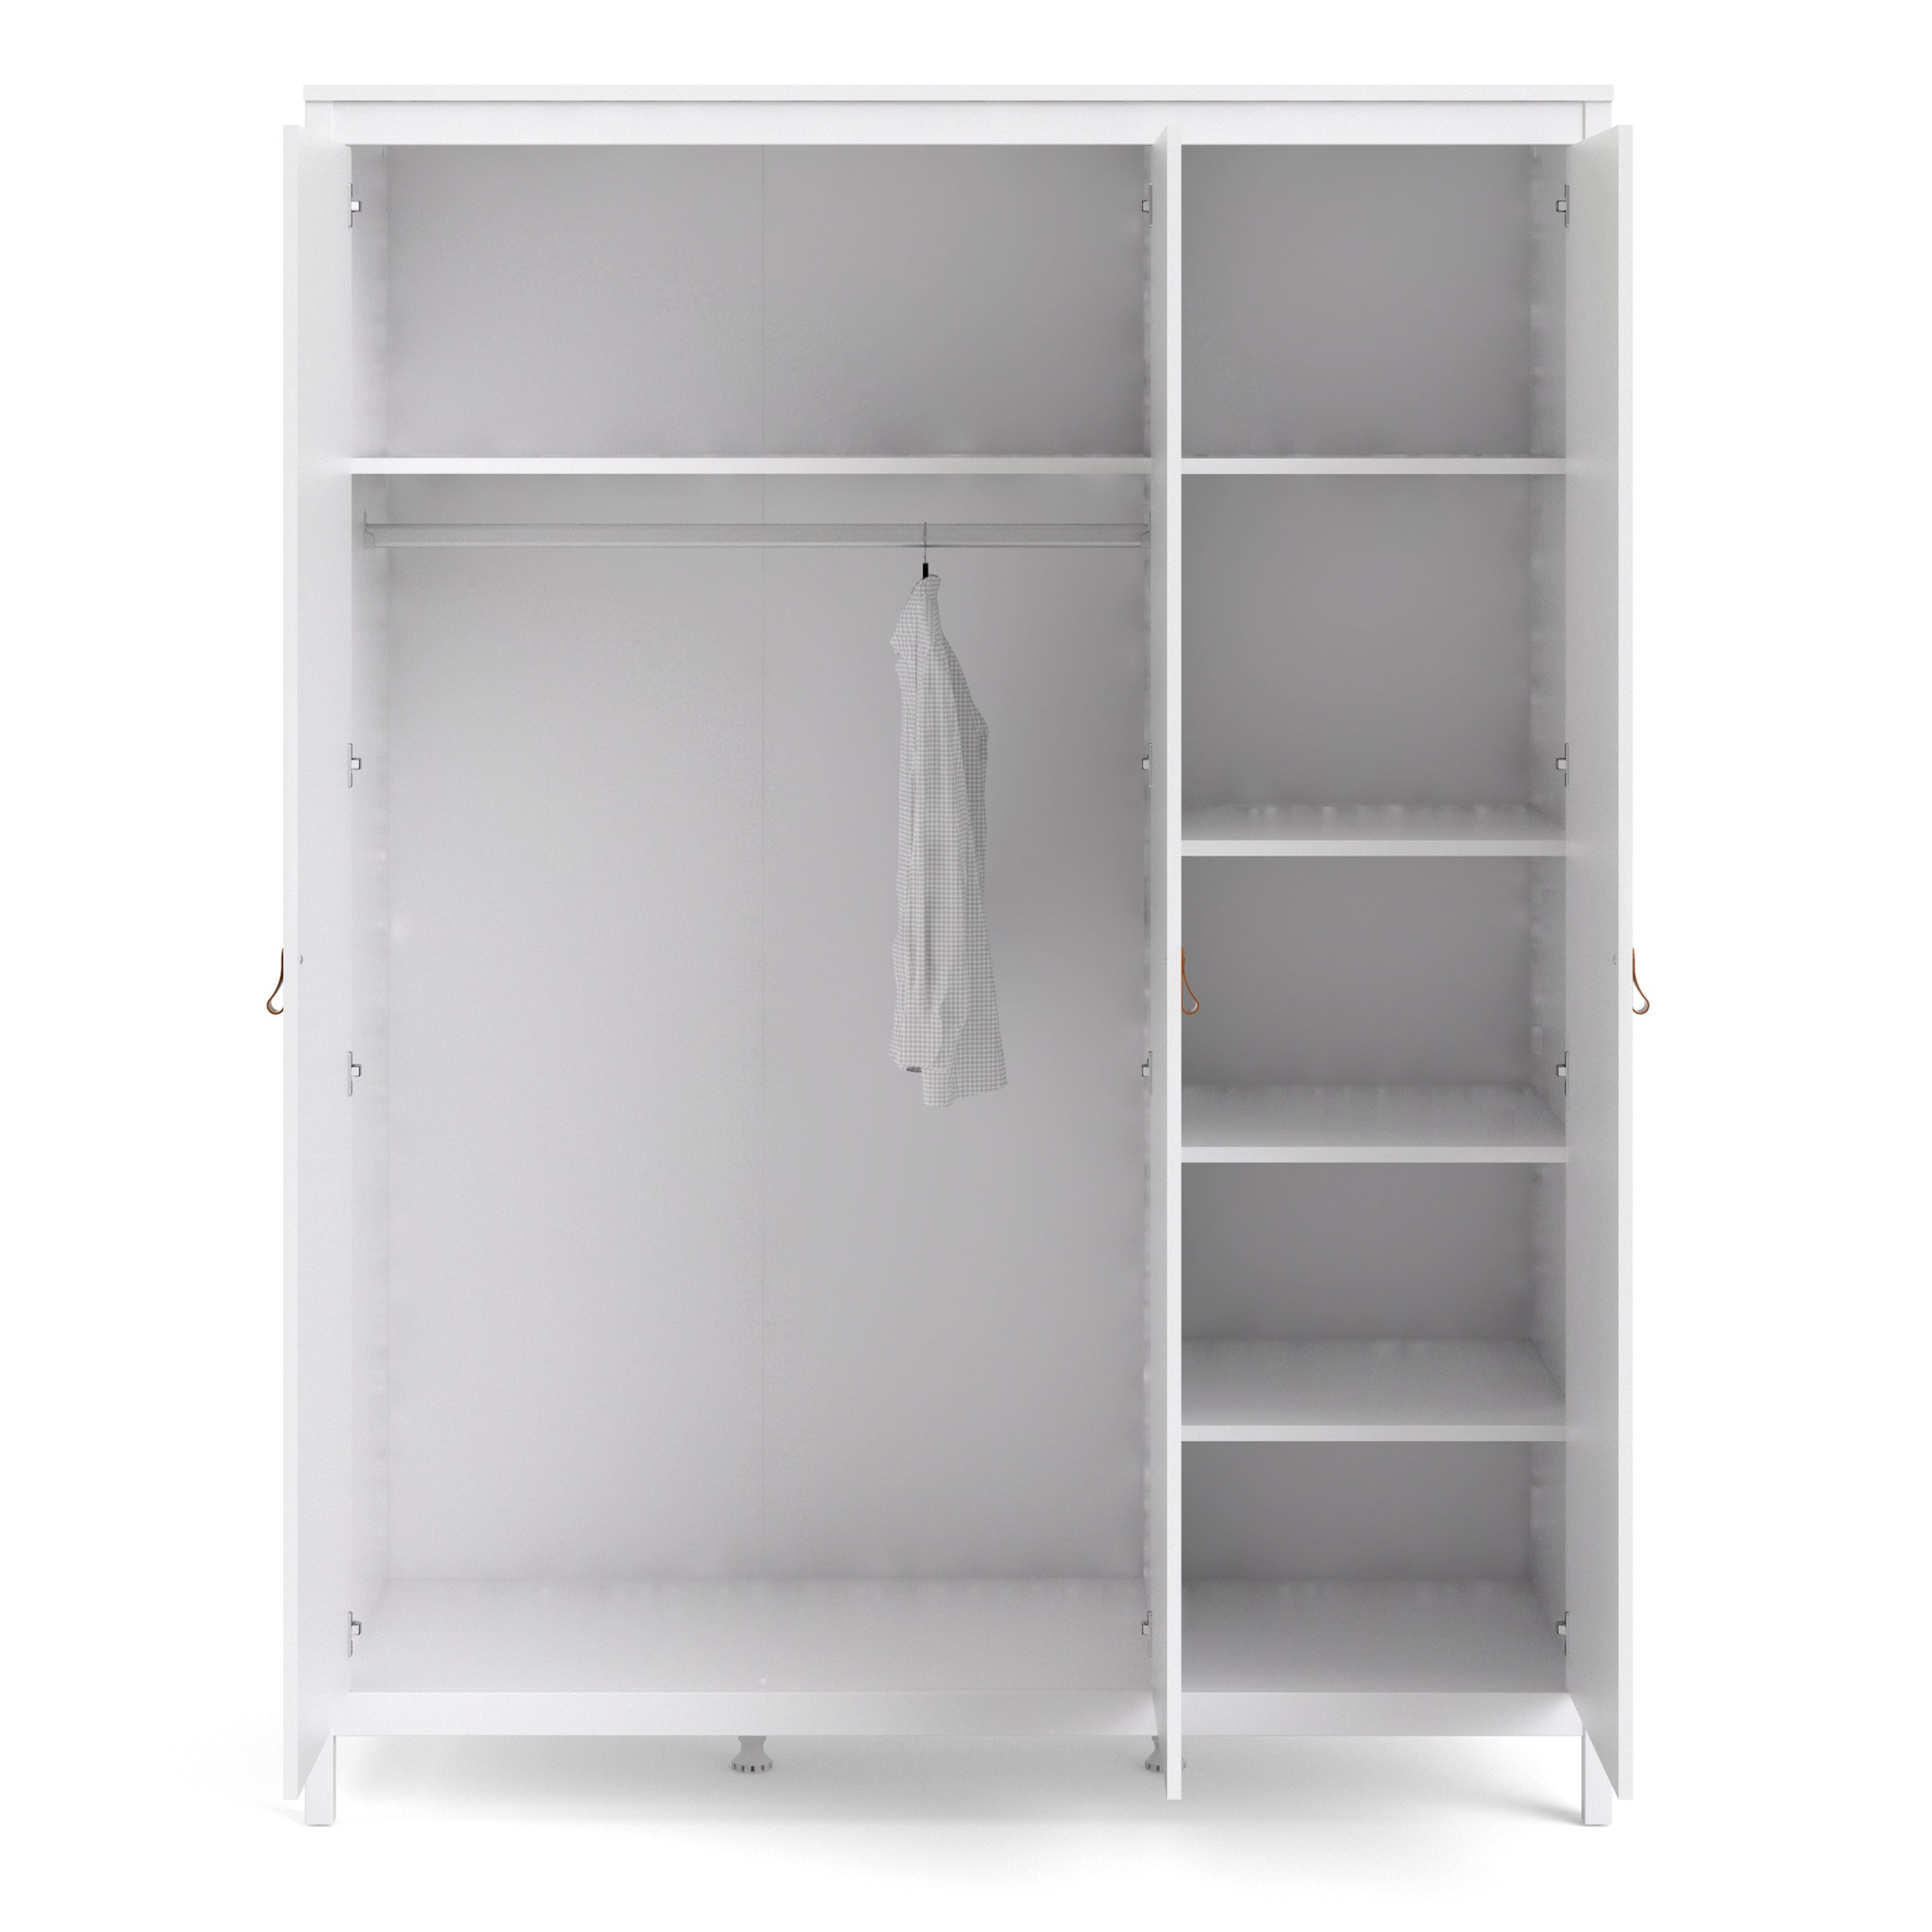 Barcelona Wardrobe with 3 Doors in White Furniture To Go Ltd